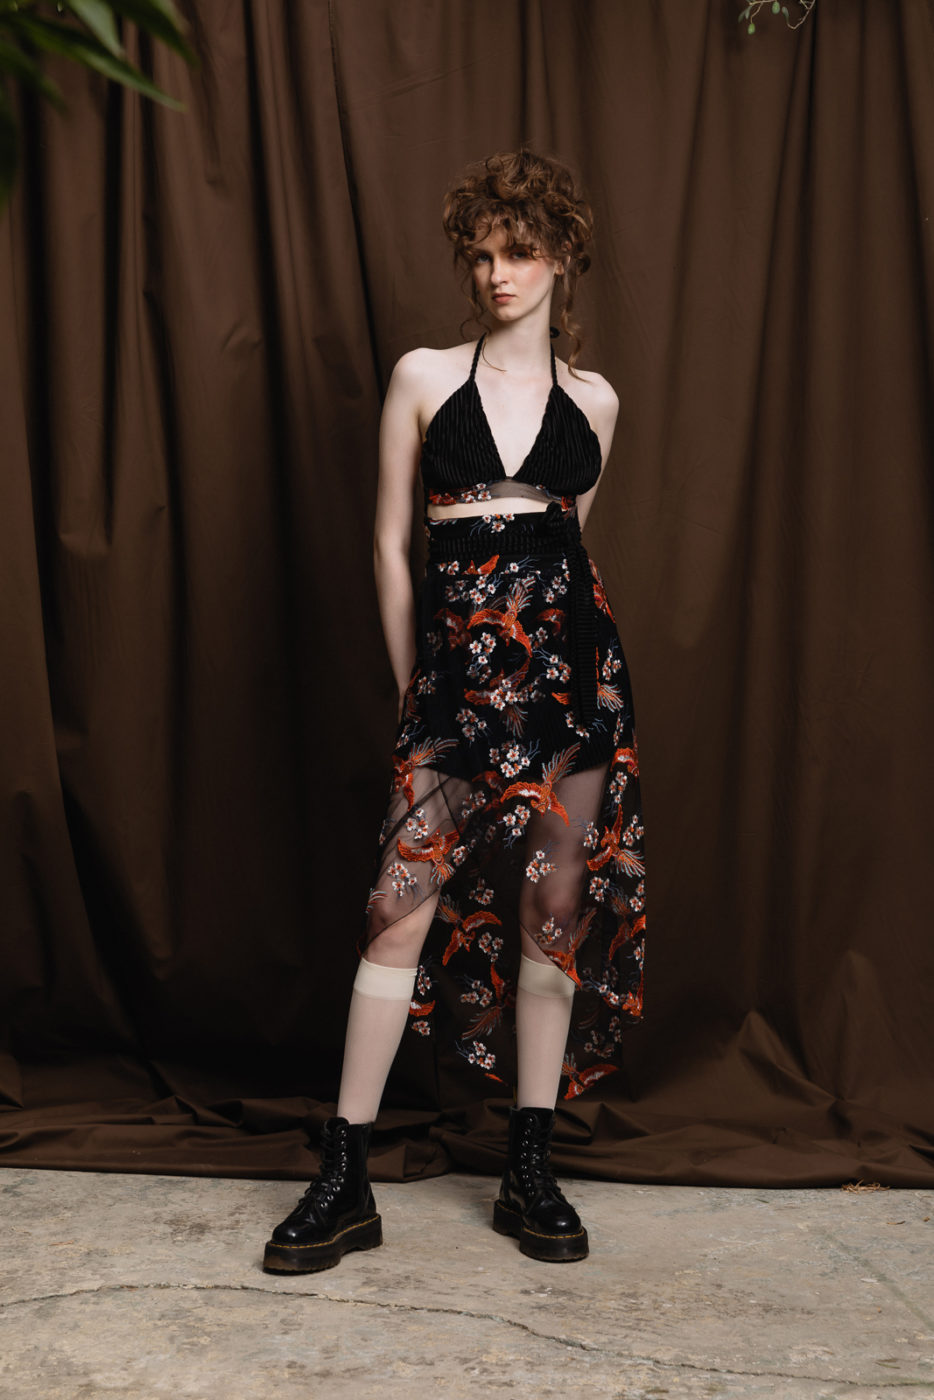 THE JERKINS ORENDA EMBROIDERED LACE RUST SKIRT